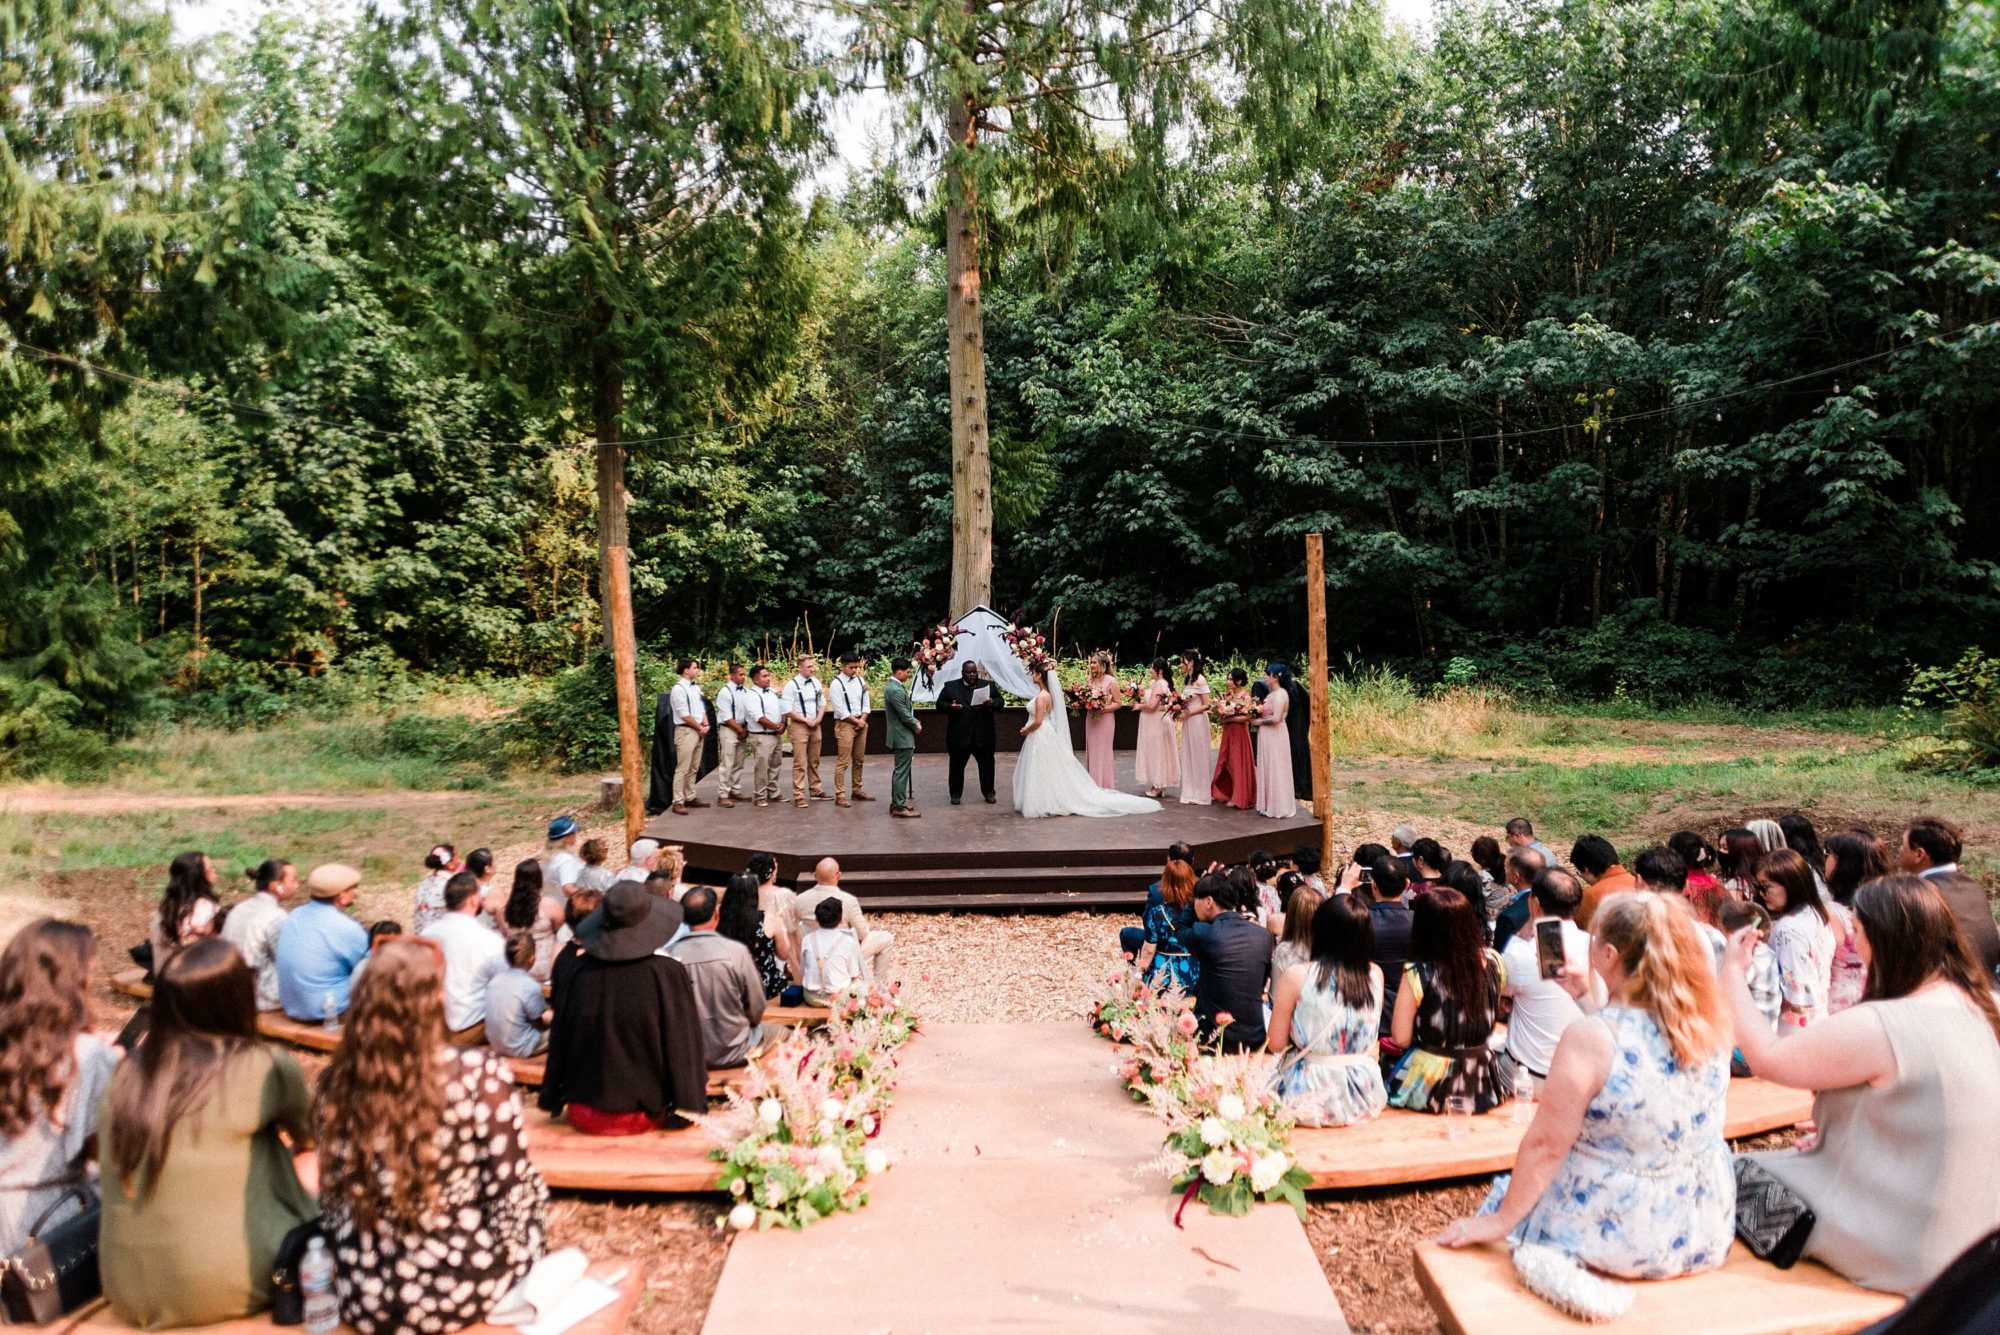 Wedding ceremony in the Moon Amphitheater at Misty Clover Farm Olympic Peninsula Wedding Venue